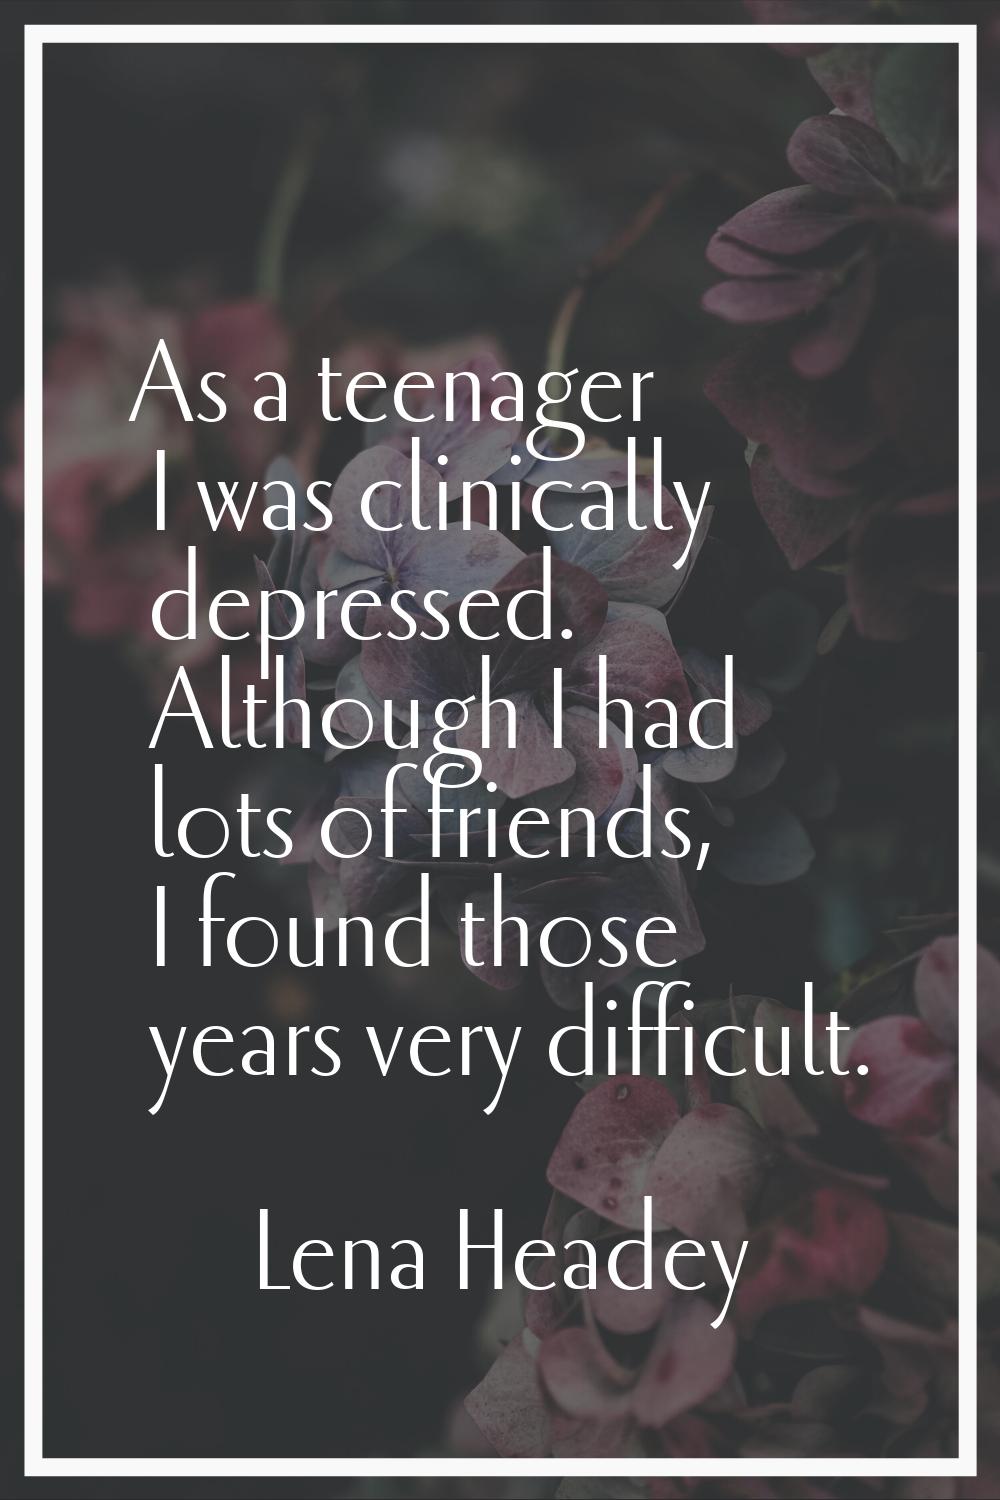 As a teenager I was clinically depressed. Although I had lots of friends, I found those years very 